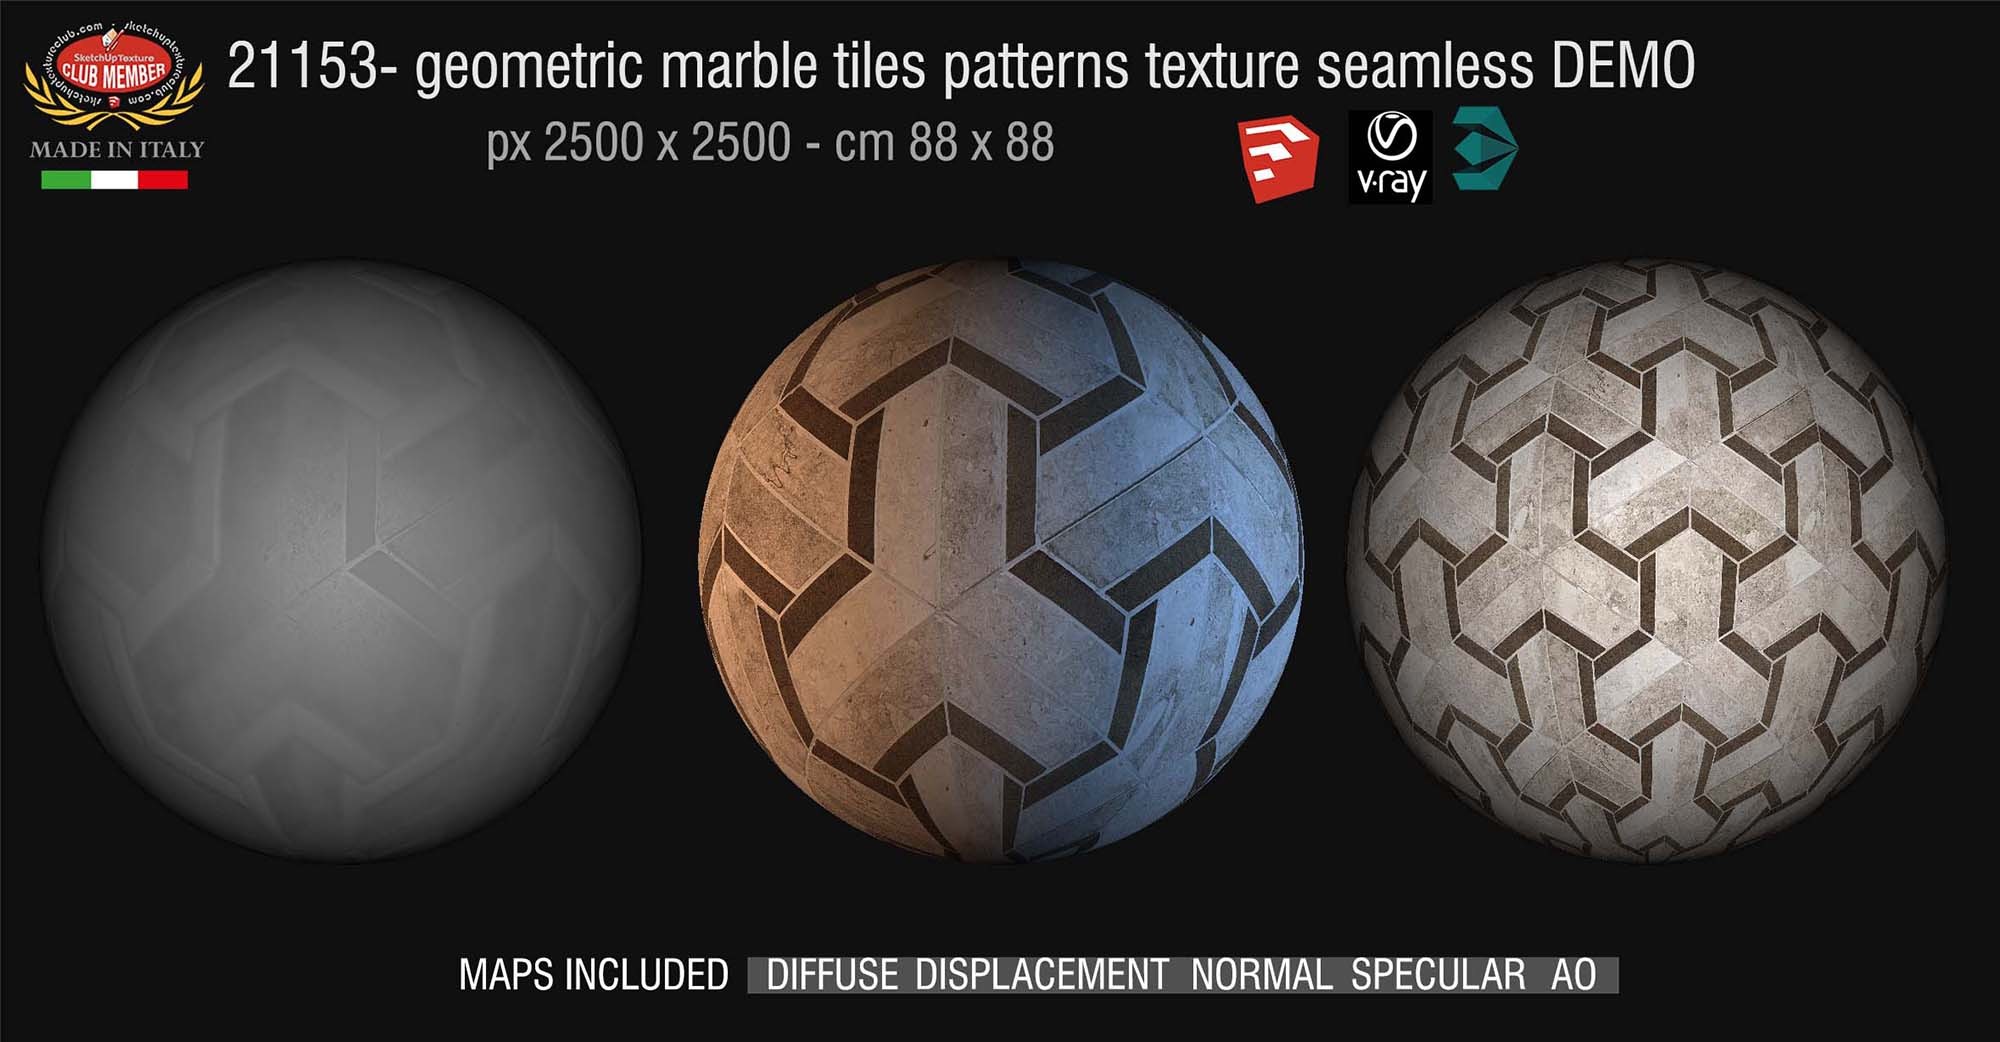 21153 Geometric marble tiles patterns texture seamless + maps DEMO